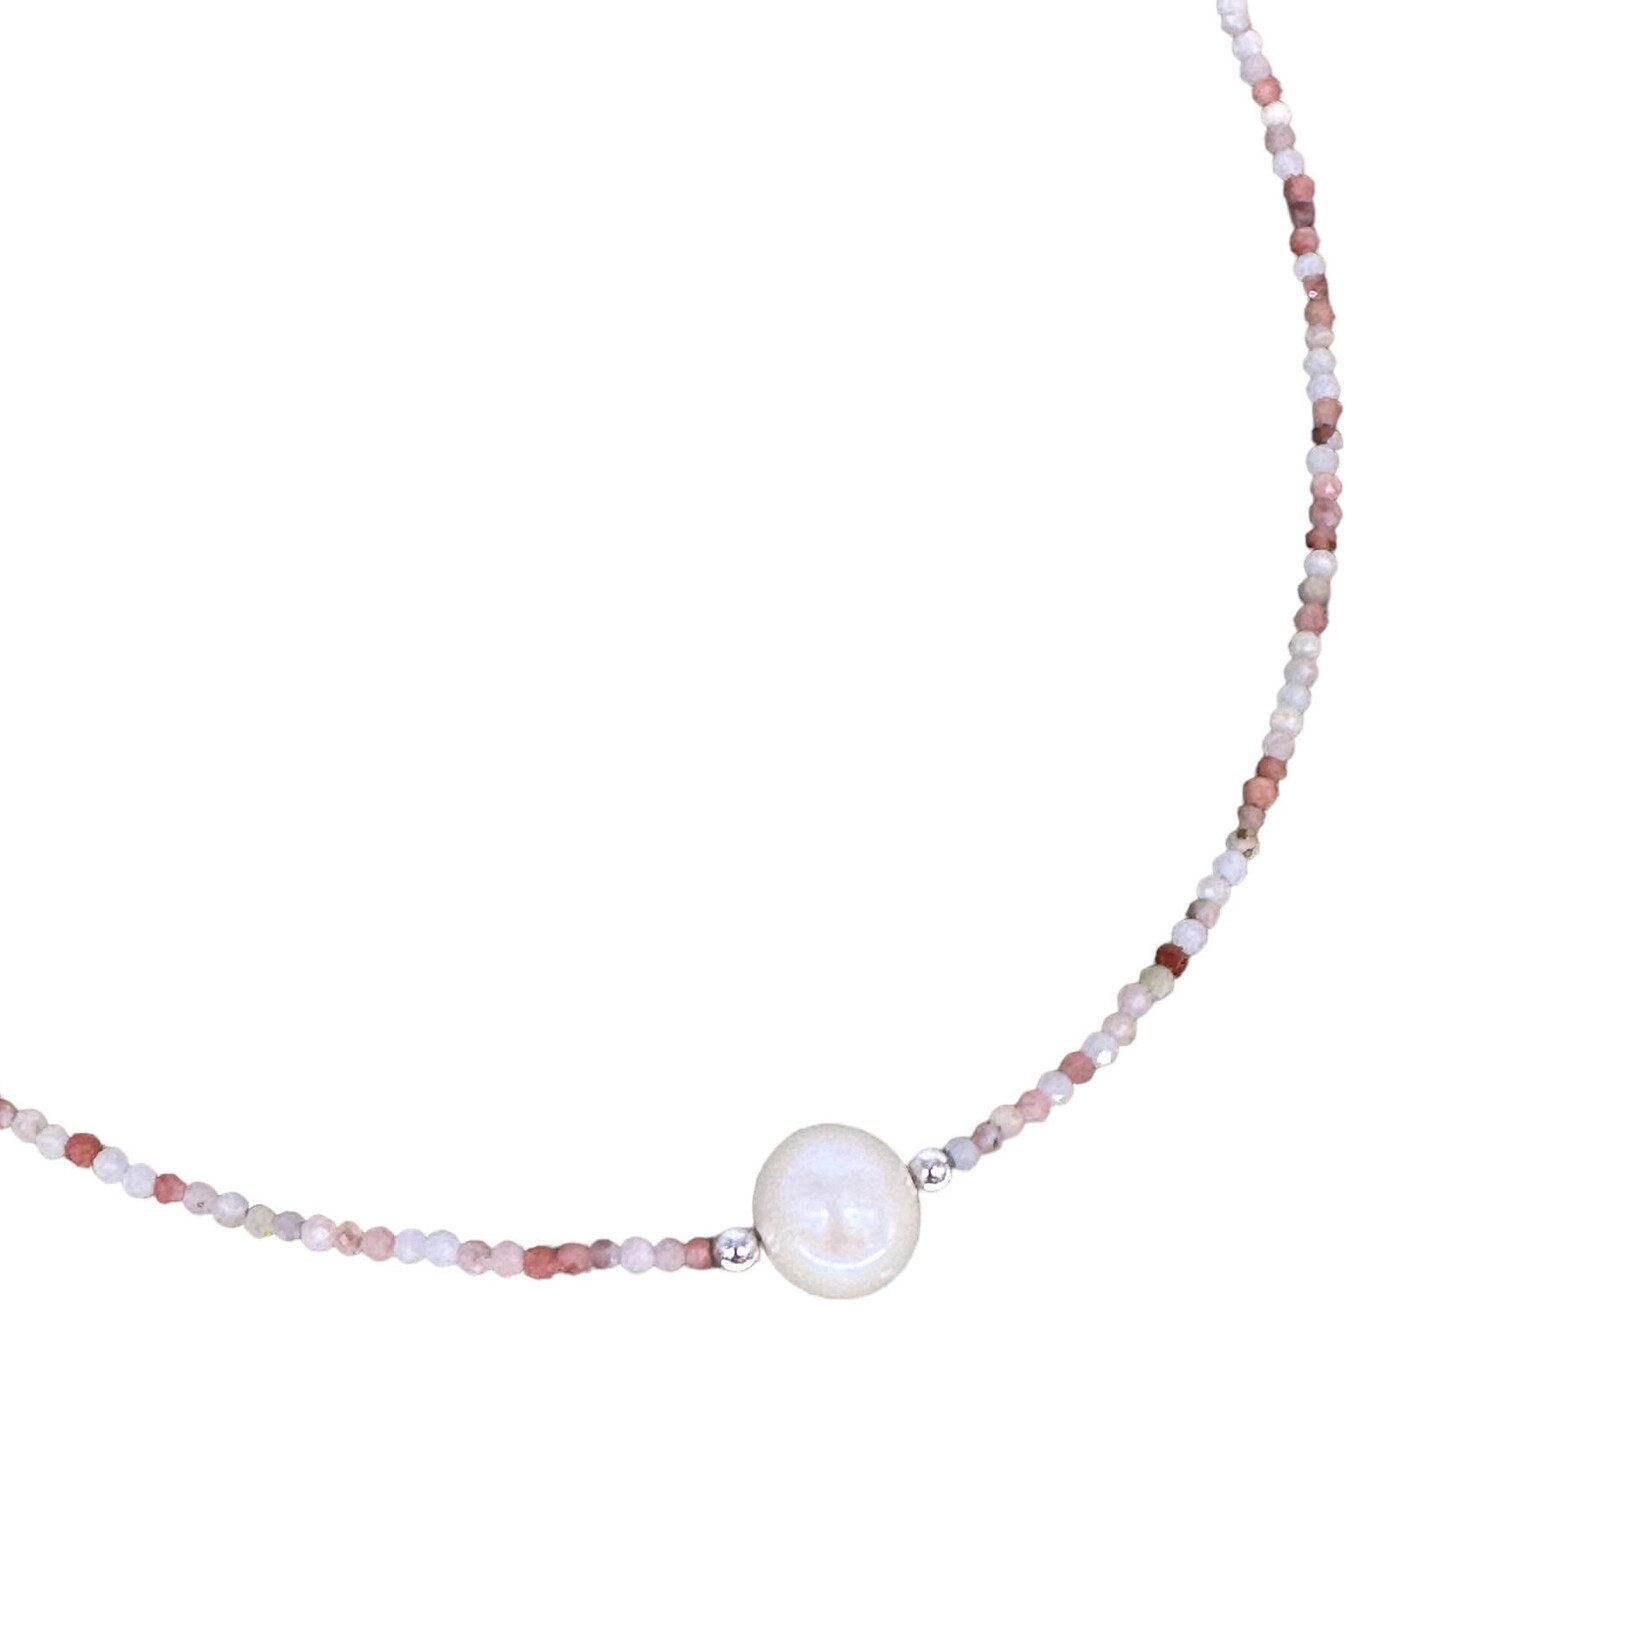 Pink Opal White Pearl Adjustable 16-18" 2mm Gemstone Bead Necklace